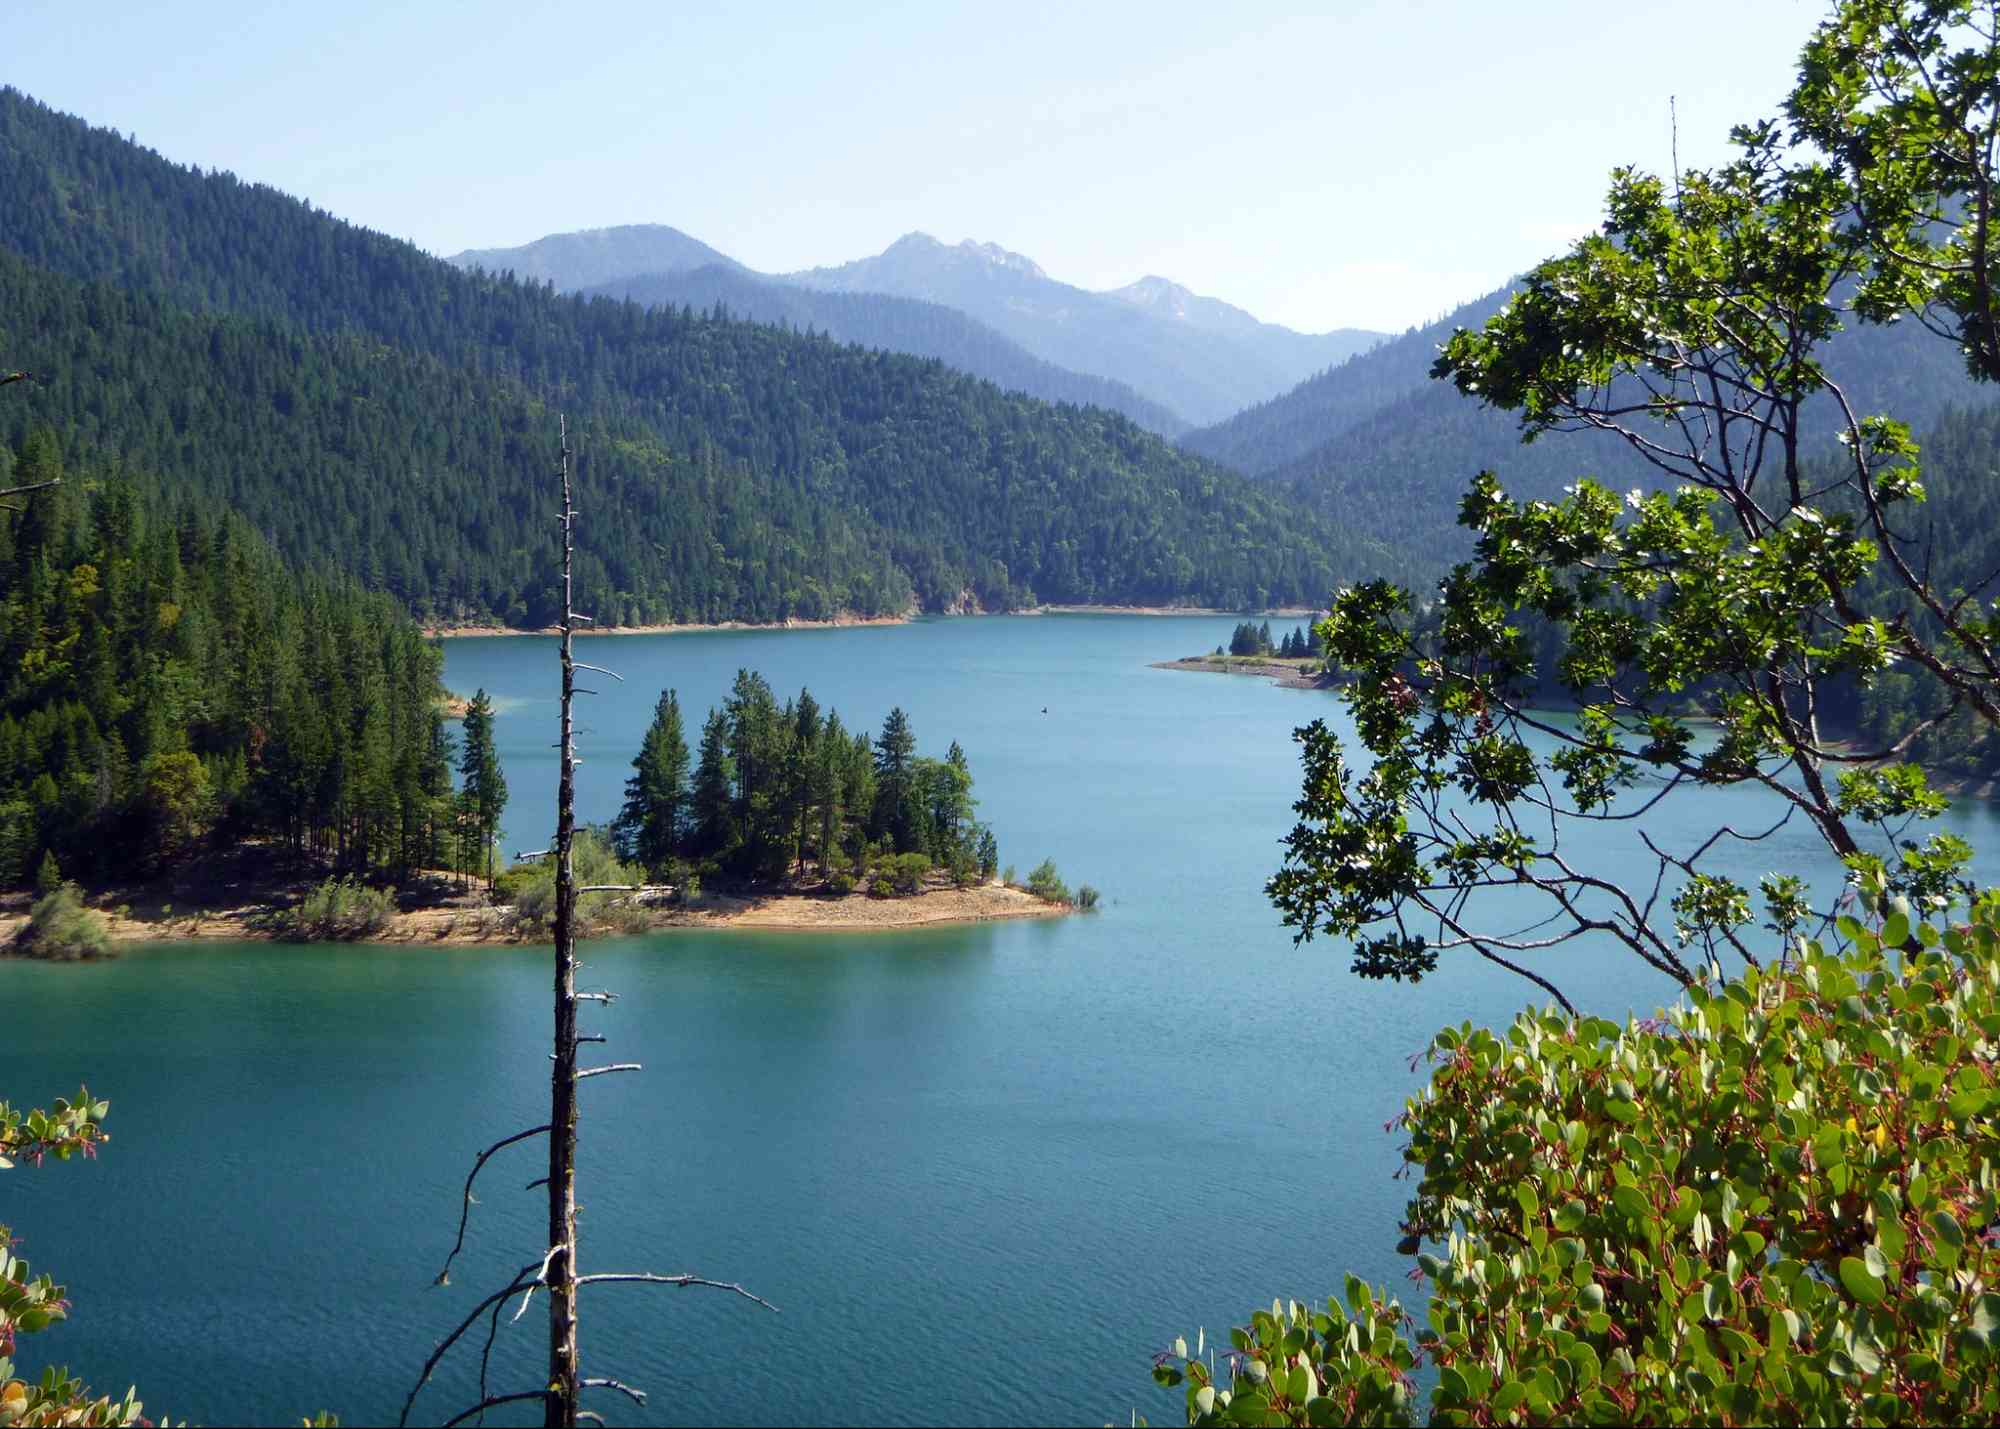 Applegate Reservoir in the Siskiyou Mountains within the Rogue River-Siskiyou National Forest